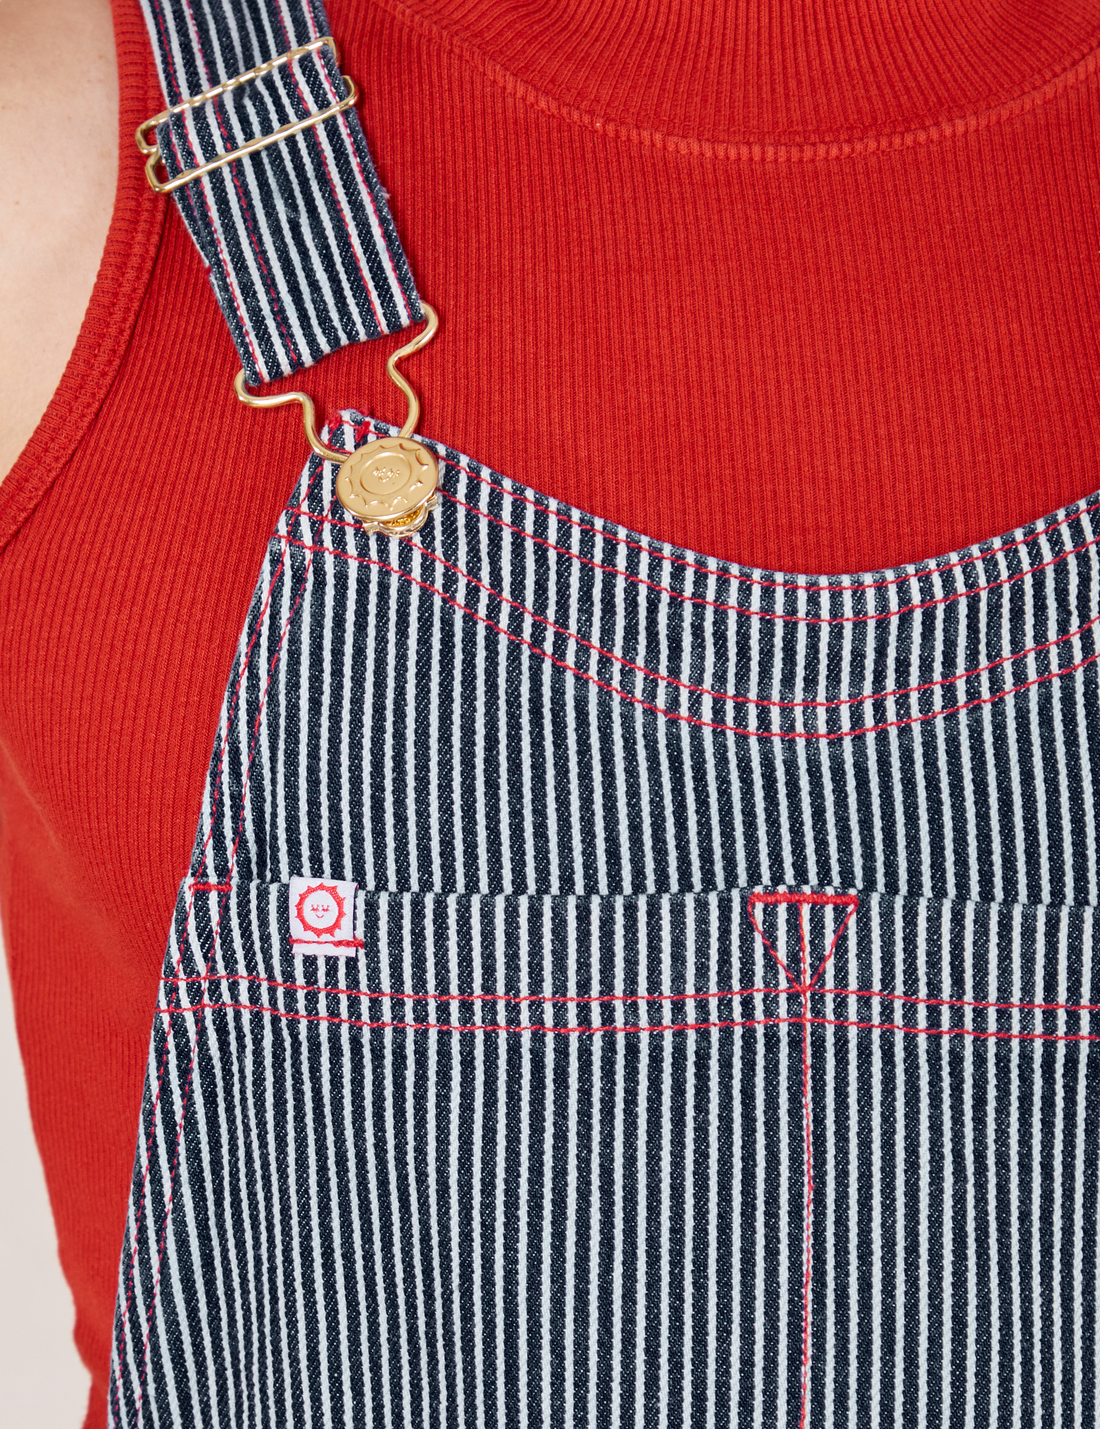 Front close up of Railroad Stripe Denim Original Overalls. Red contrast stitching and white and red sun baby tag.